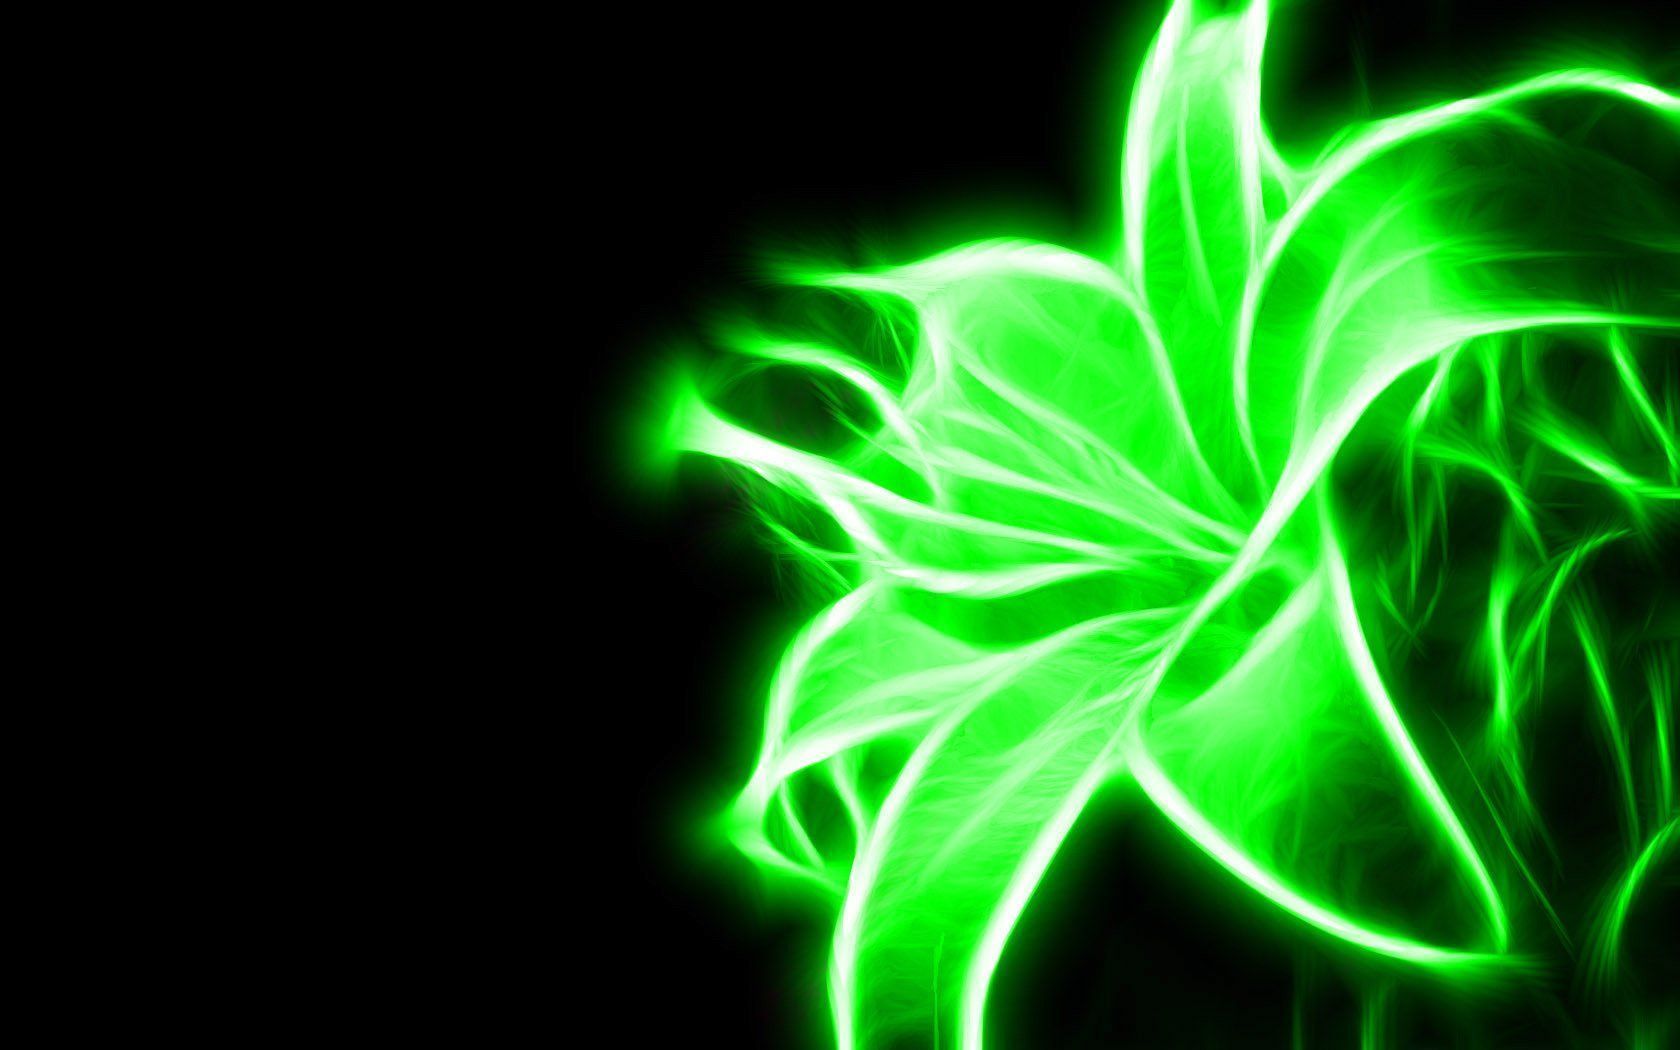 Lily flower wallpaper 1920x - Lime green, neon green